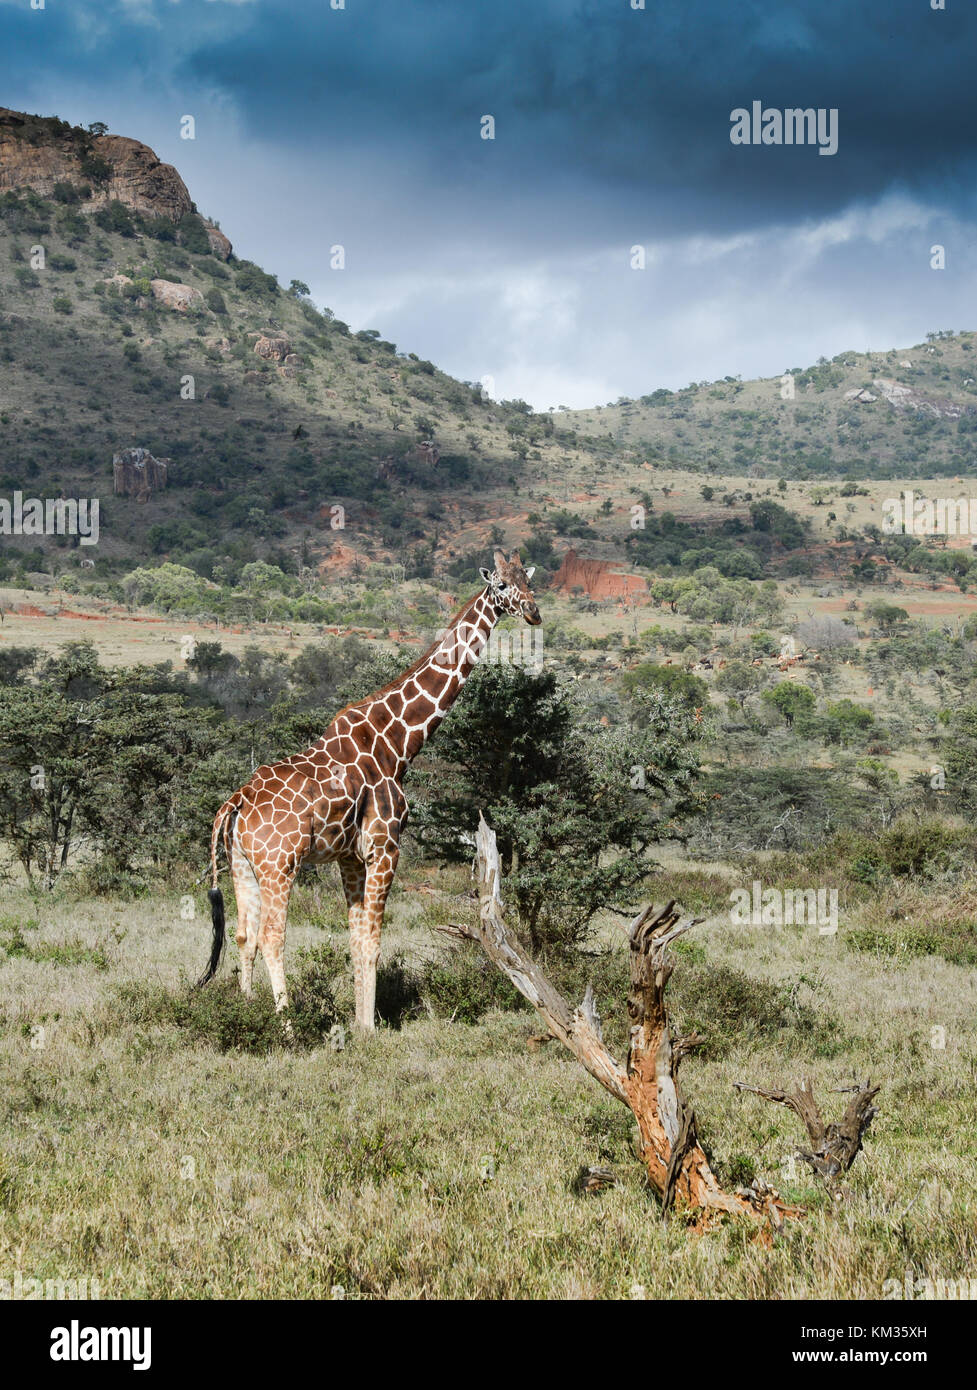 The reticulated giraffe also known as the Somali giraffe, is native to Somalia, southern Ethiopia, and northern Kenya. Stock Photo